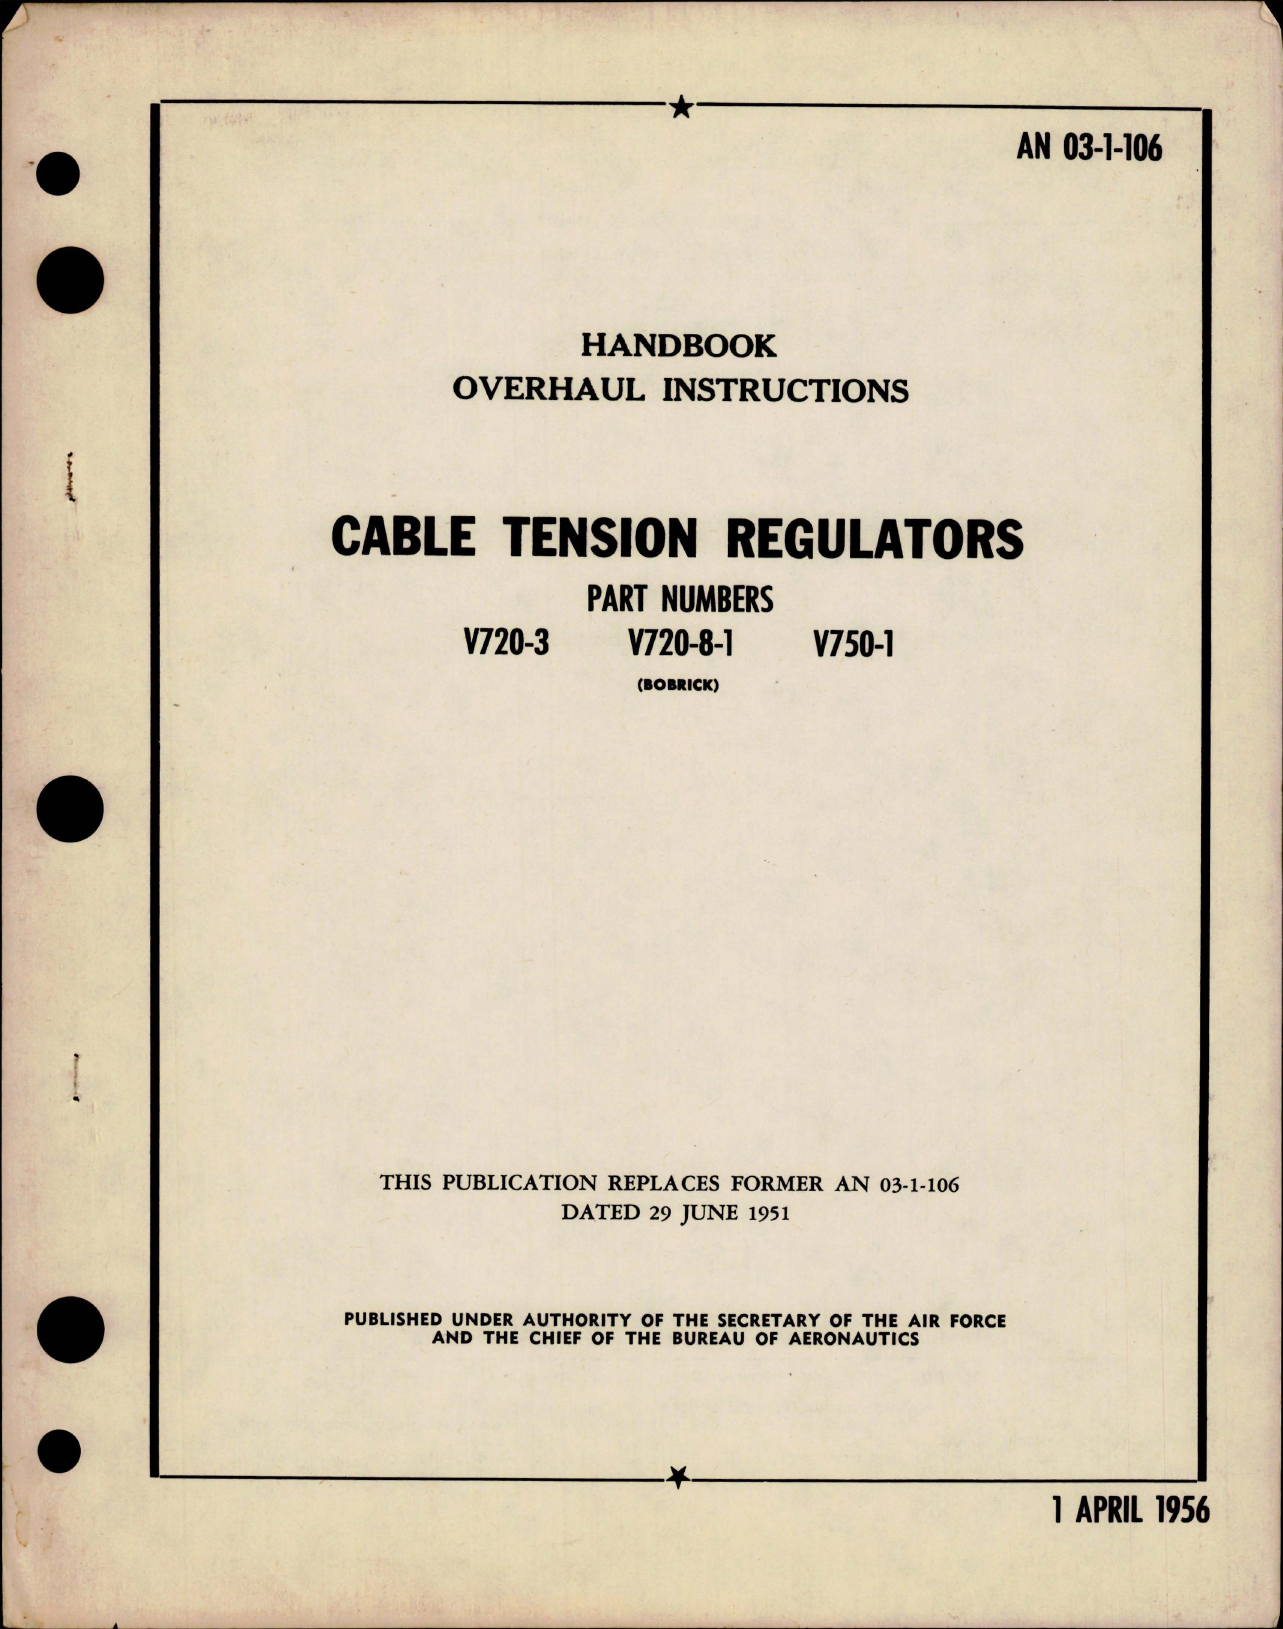 Sample page 1 from AirCorps Library document: Overhaul Instructions for Cable Tension Regulators - Parts V720-3, V720-8-1 and V750-1